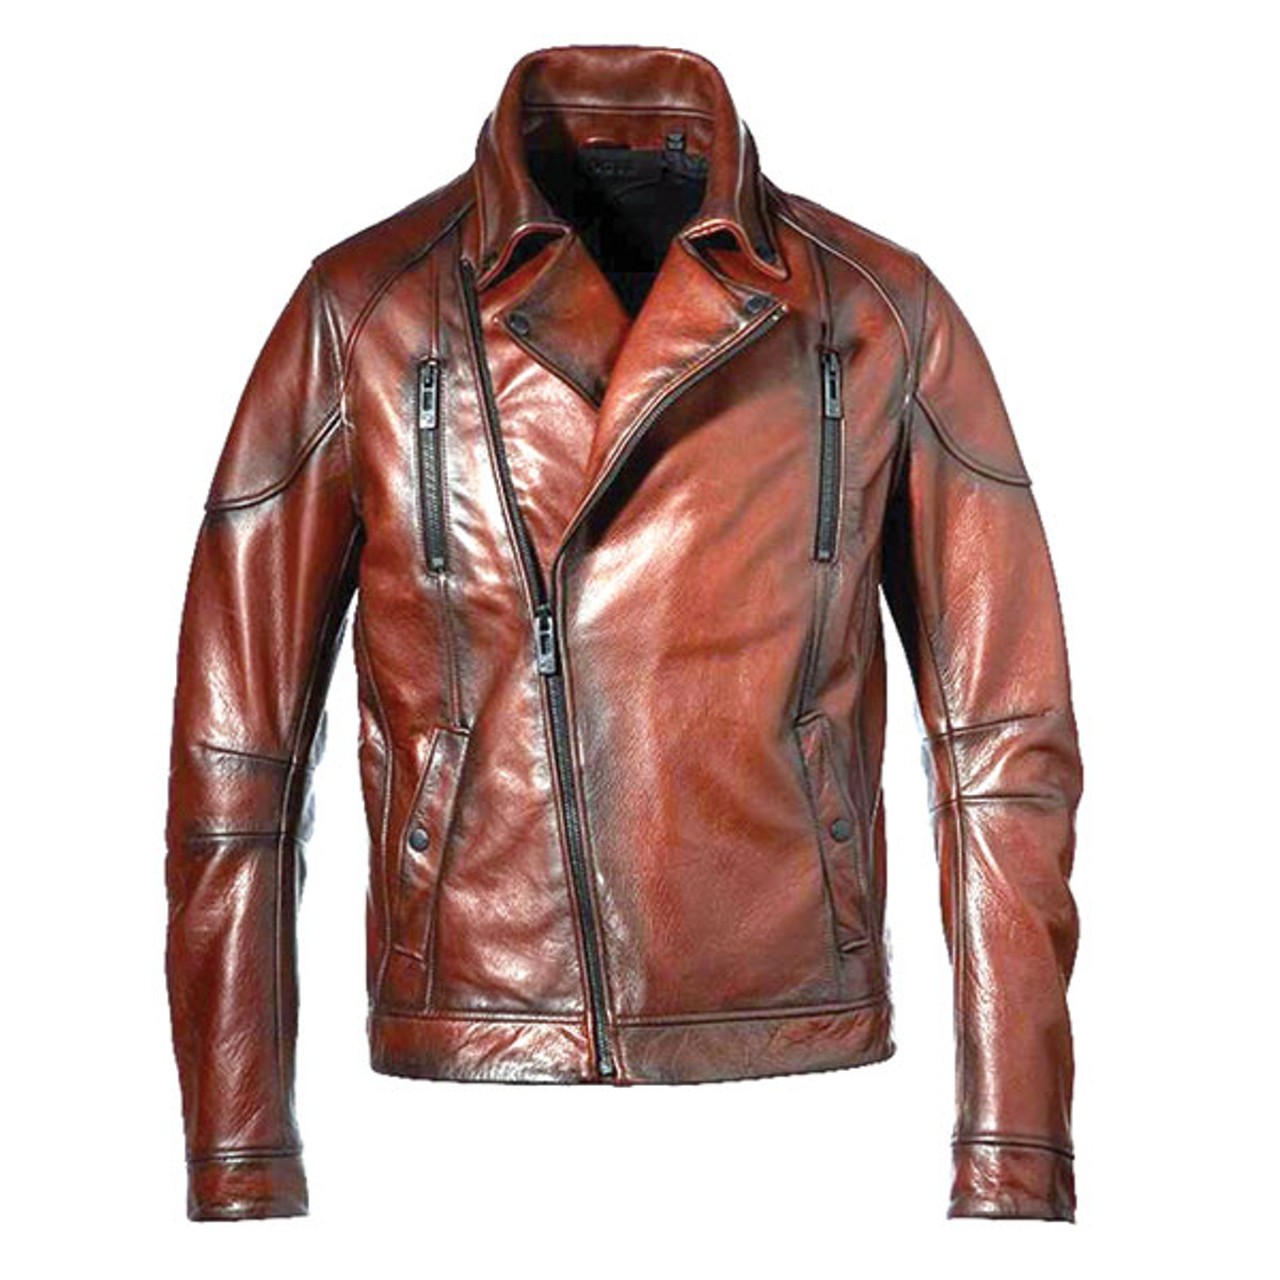 Wrap this up and he might not mind getting dragged to the office holiday party. Rogue leather jacket, $695. Dolce Moda. 505 S. Main St., Royal Oak; 248-399-6200.